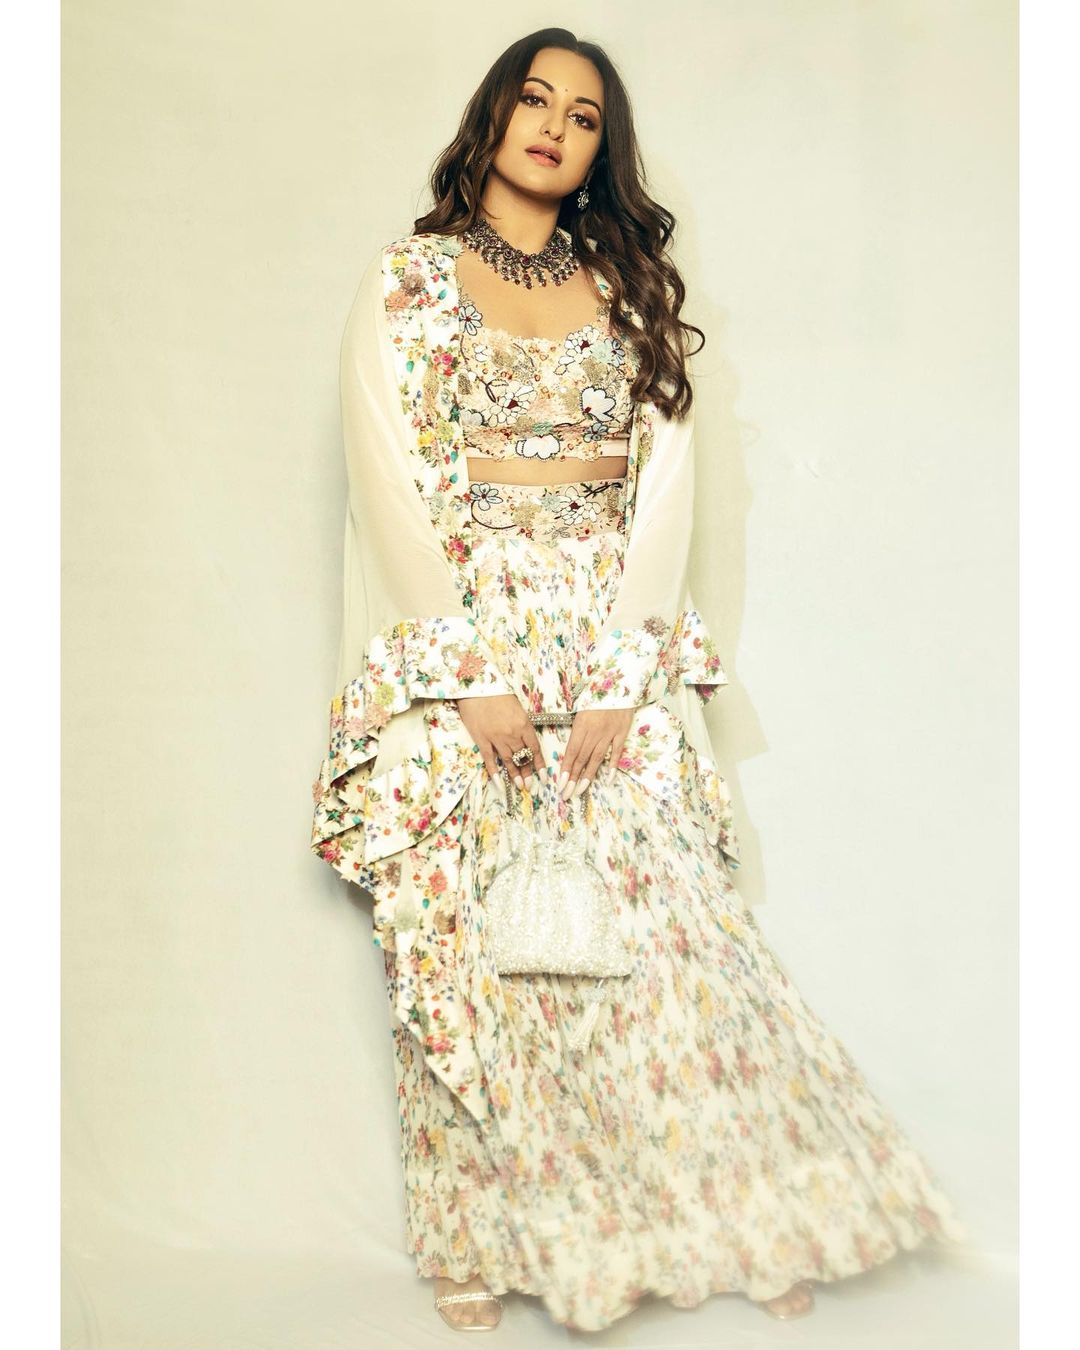 Sonakshi Sinha Looks Fabulous In Stylish Floral Outfits See The Divas Hottest Flower Power